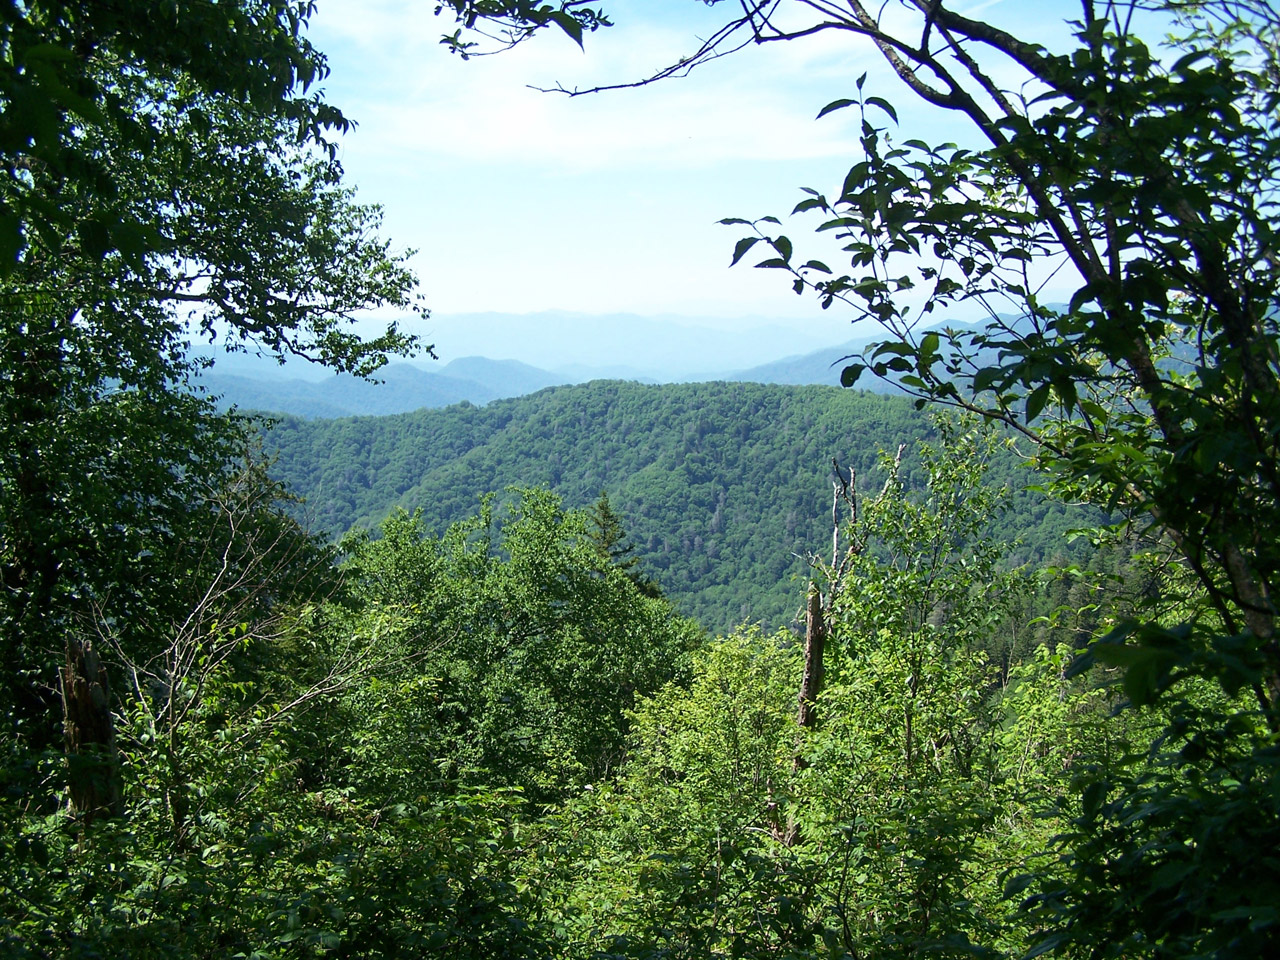 View of the Smoky Mountains from a hill about Gatlinburg, TN